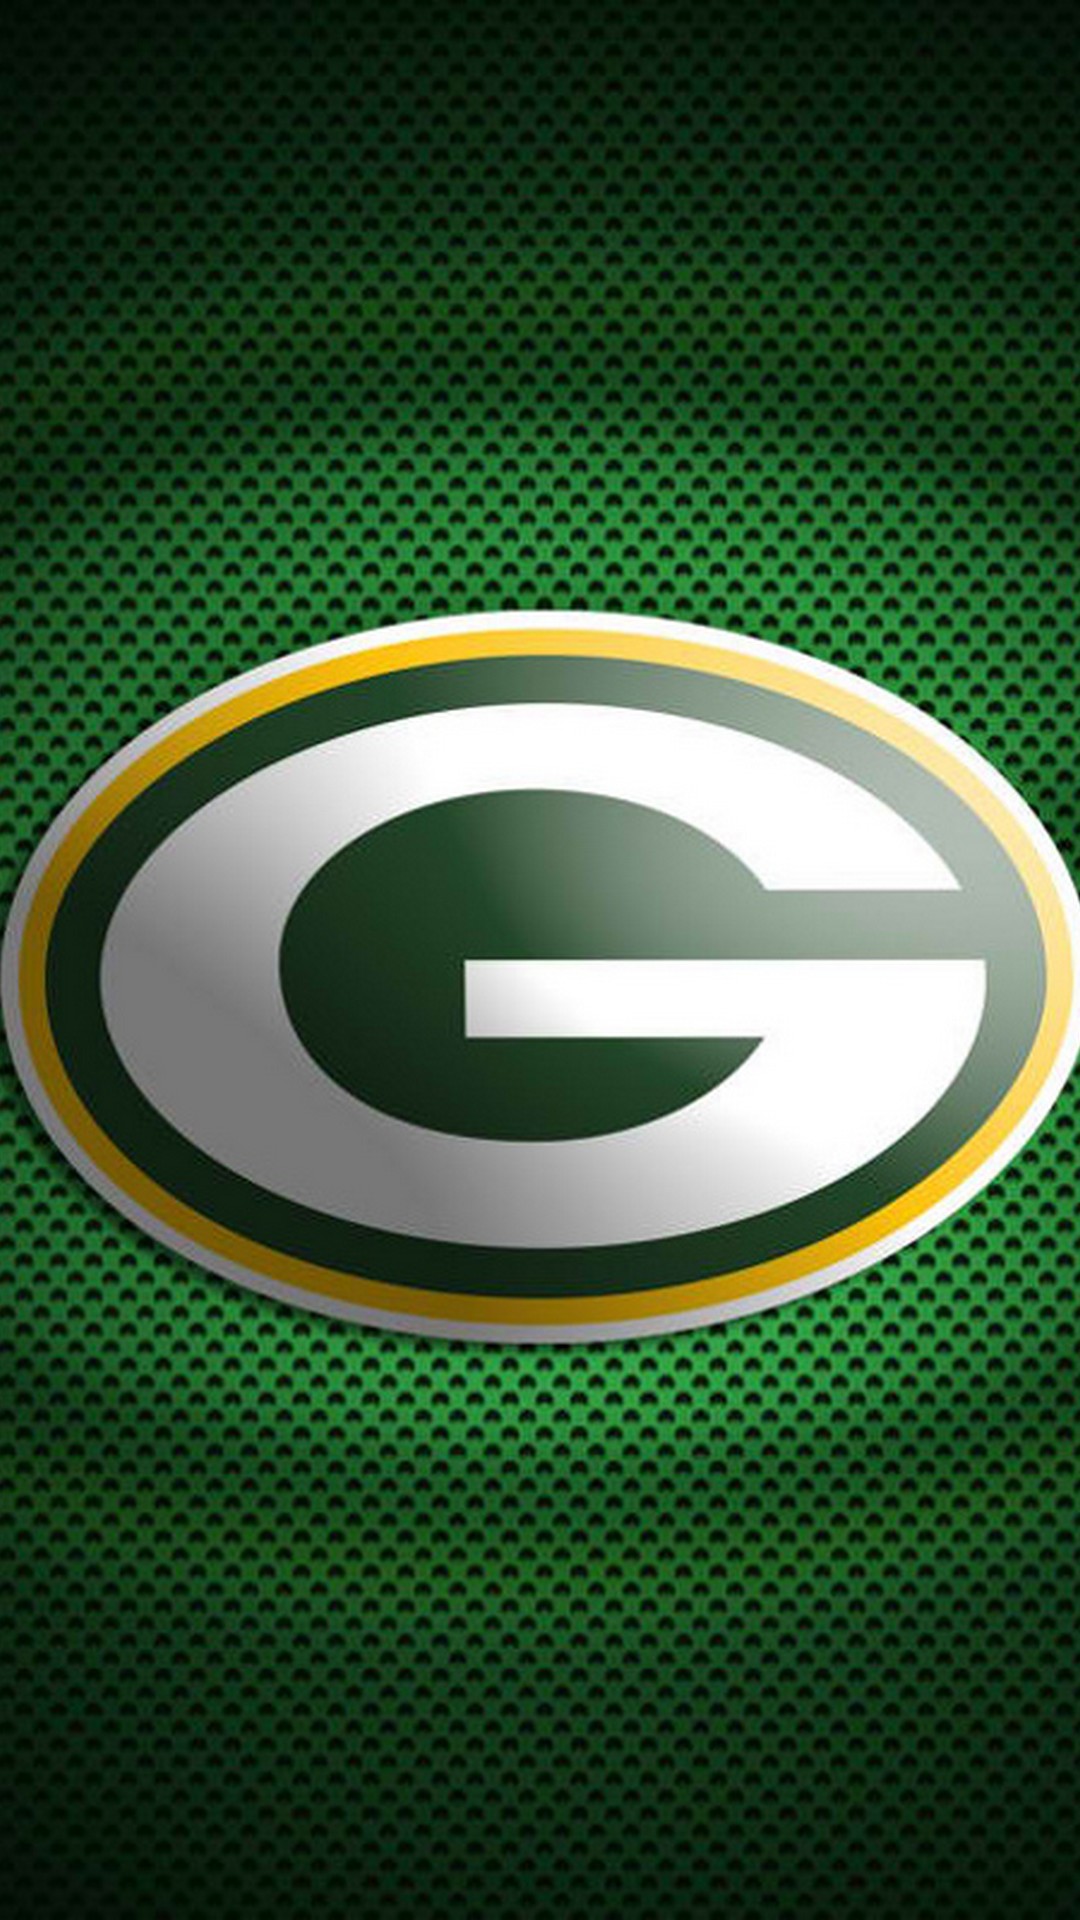 Apple Green Bay Packers Logo iPhone Wallpaper with high-resolution 1080x1920 pixel. Donwload and set as wallpaper for your iPhone X, iPhone XS home screen backgrounds, XS Max, XR, iPhone8 lock screen wallpaper, iPhone 7, 6, SE and other mobile devices